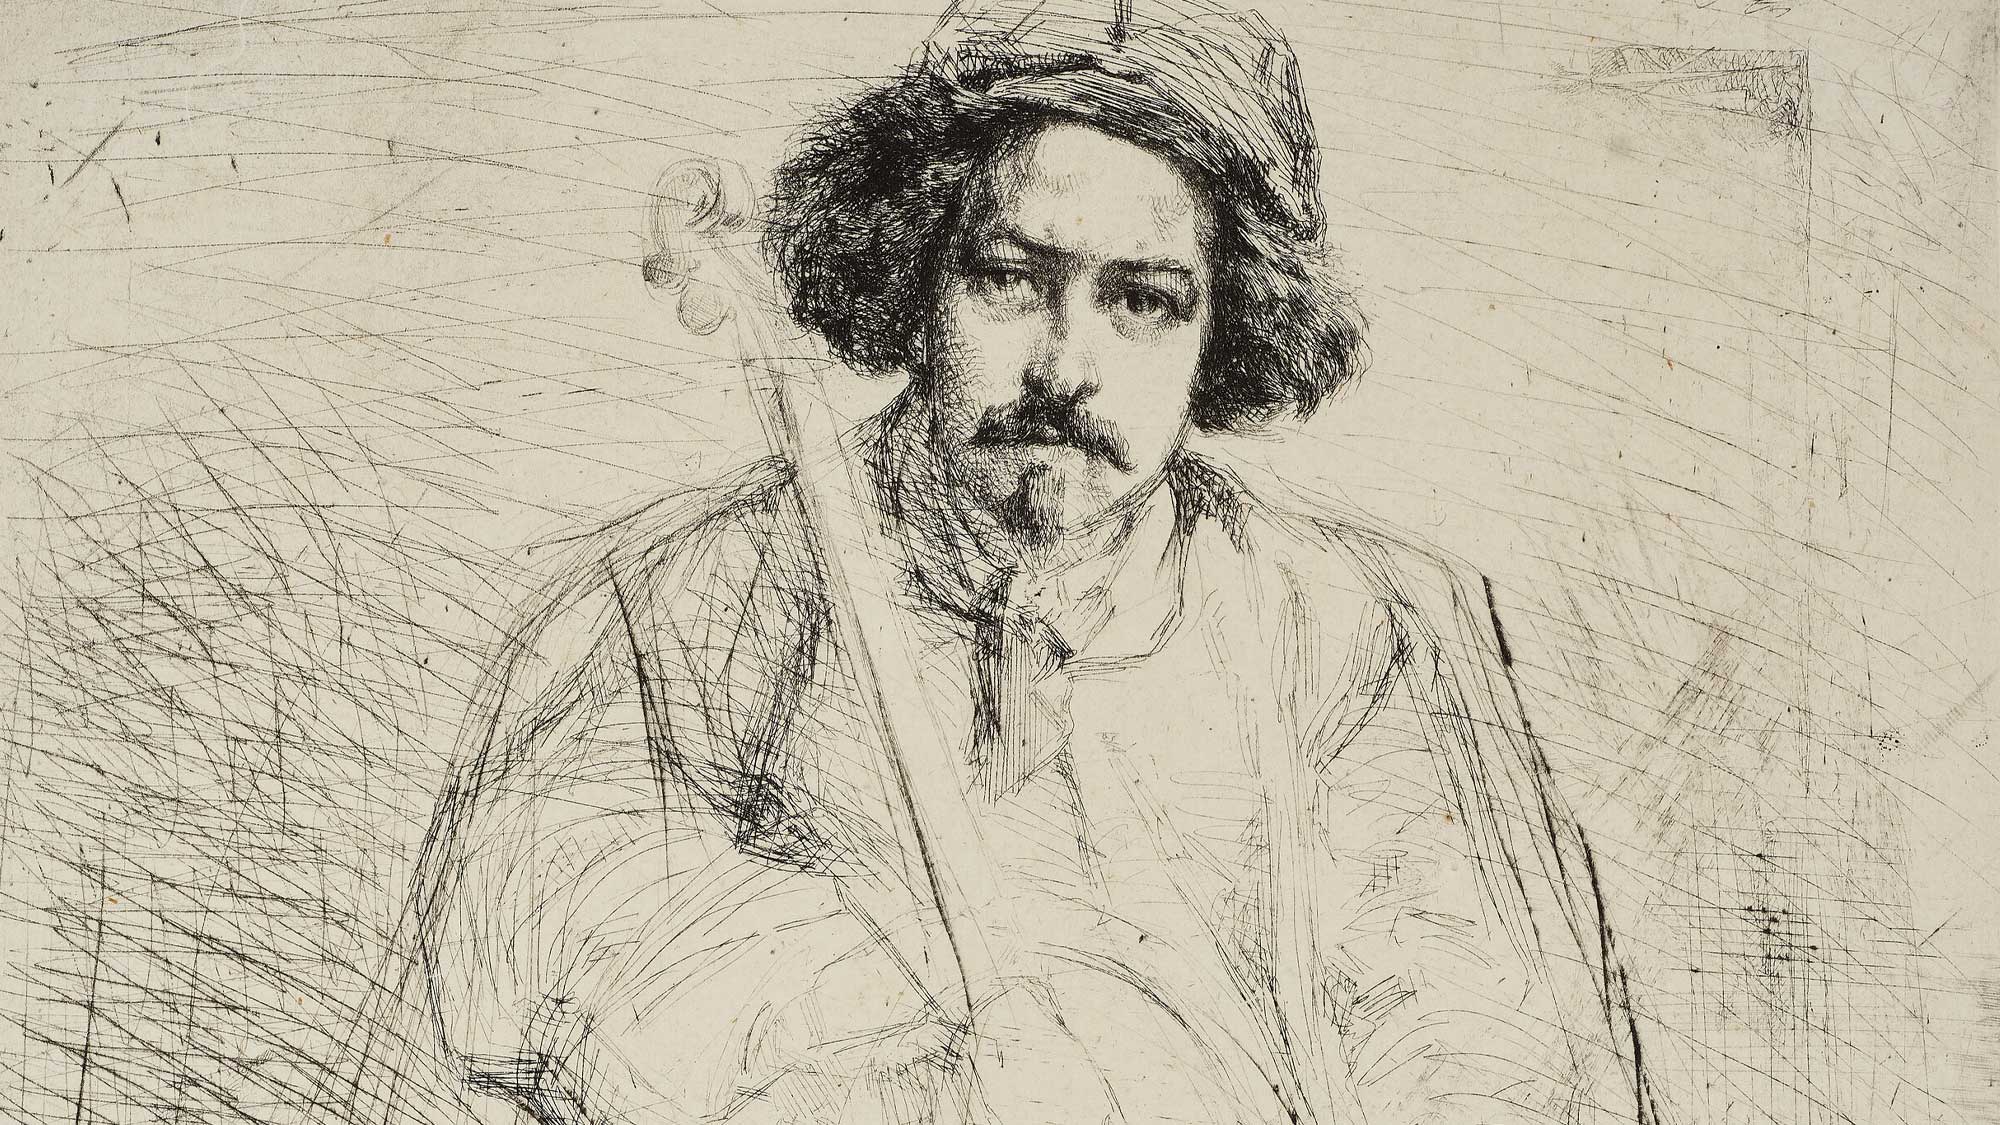 Black and white sketch of a man with a fiddle